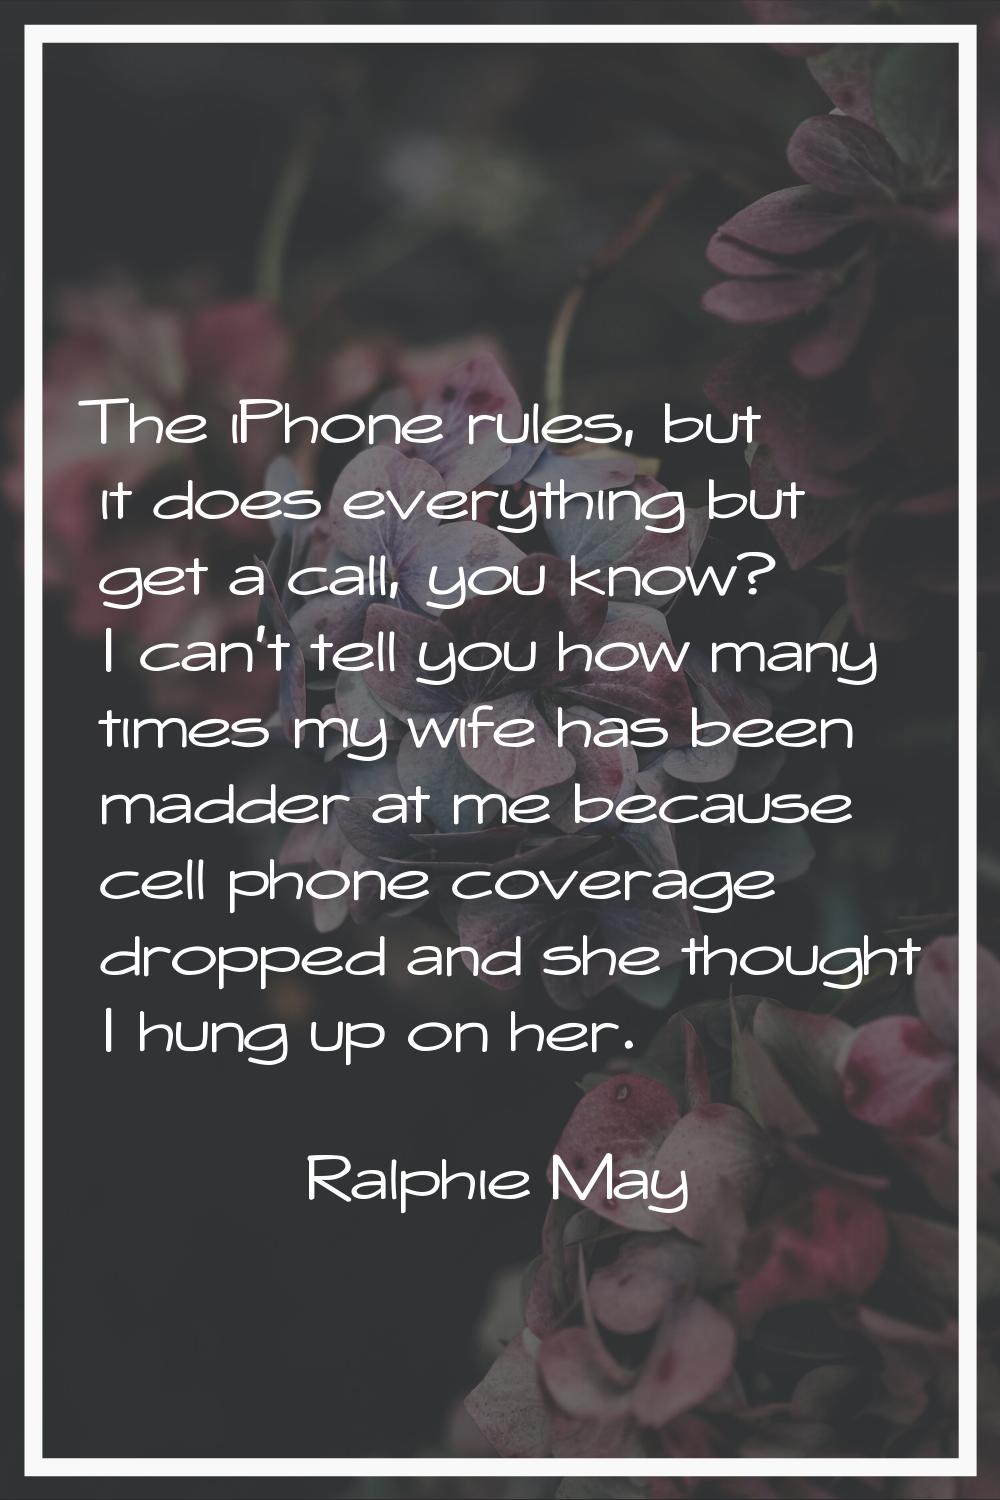 The iPhone rules, but it does everything but get a call, you know? I can't tell you how many times 